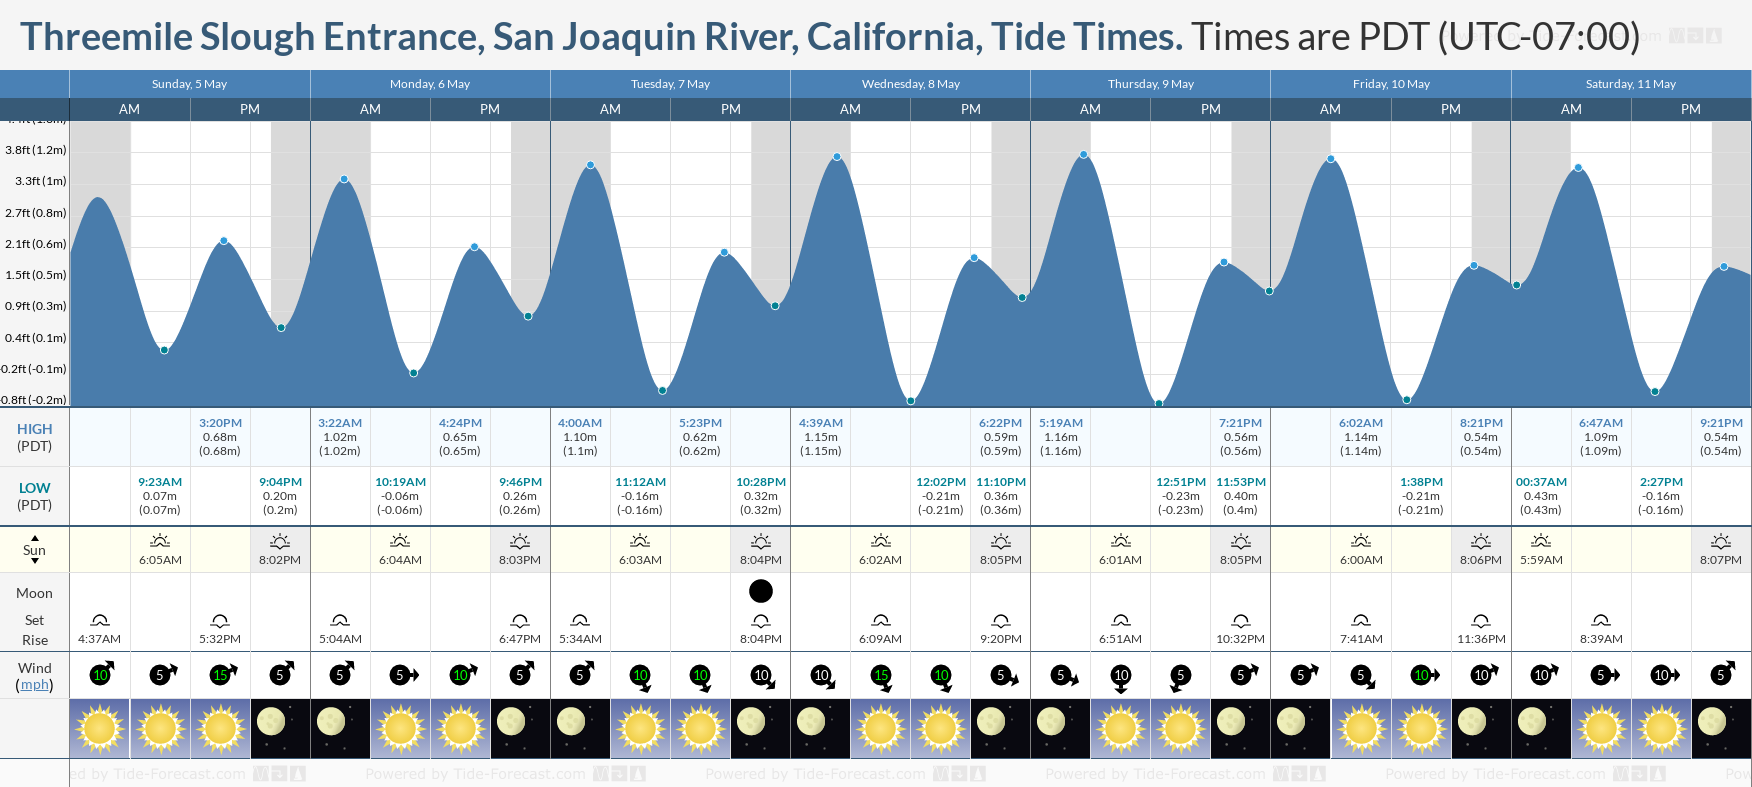 Threemile Slough Entrance, San Joaquin River, California Tide Chart including high and low tide tide times for the next 7 days